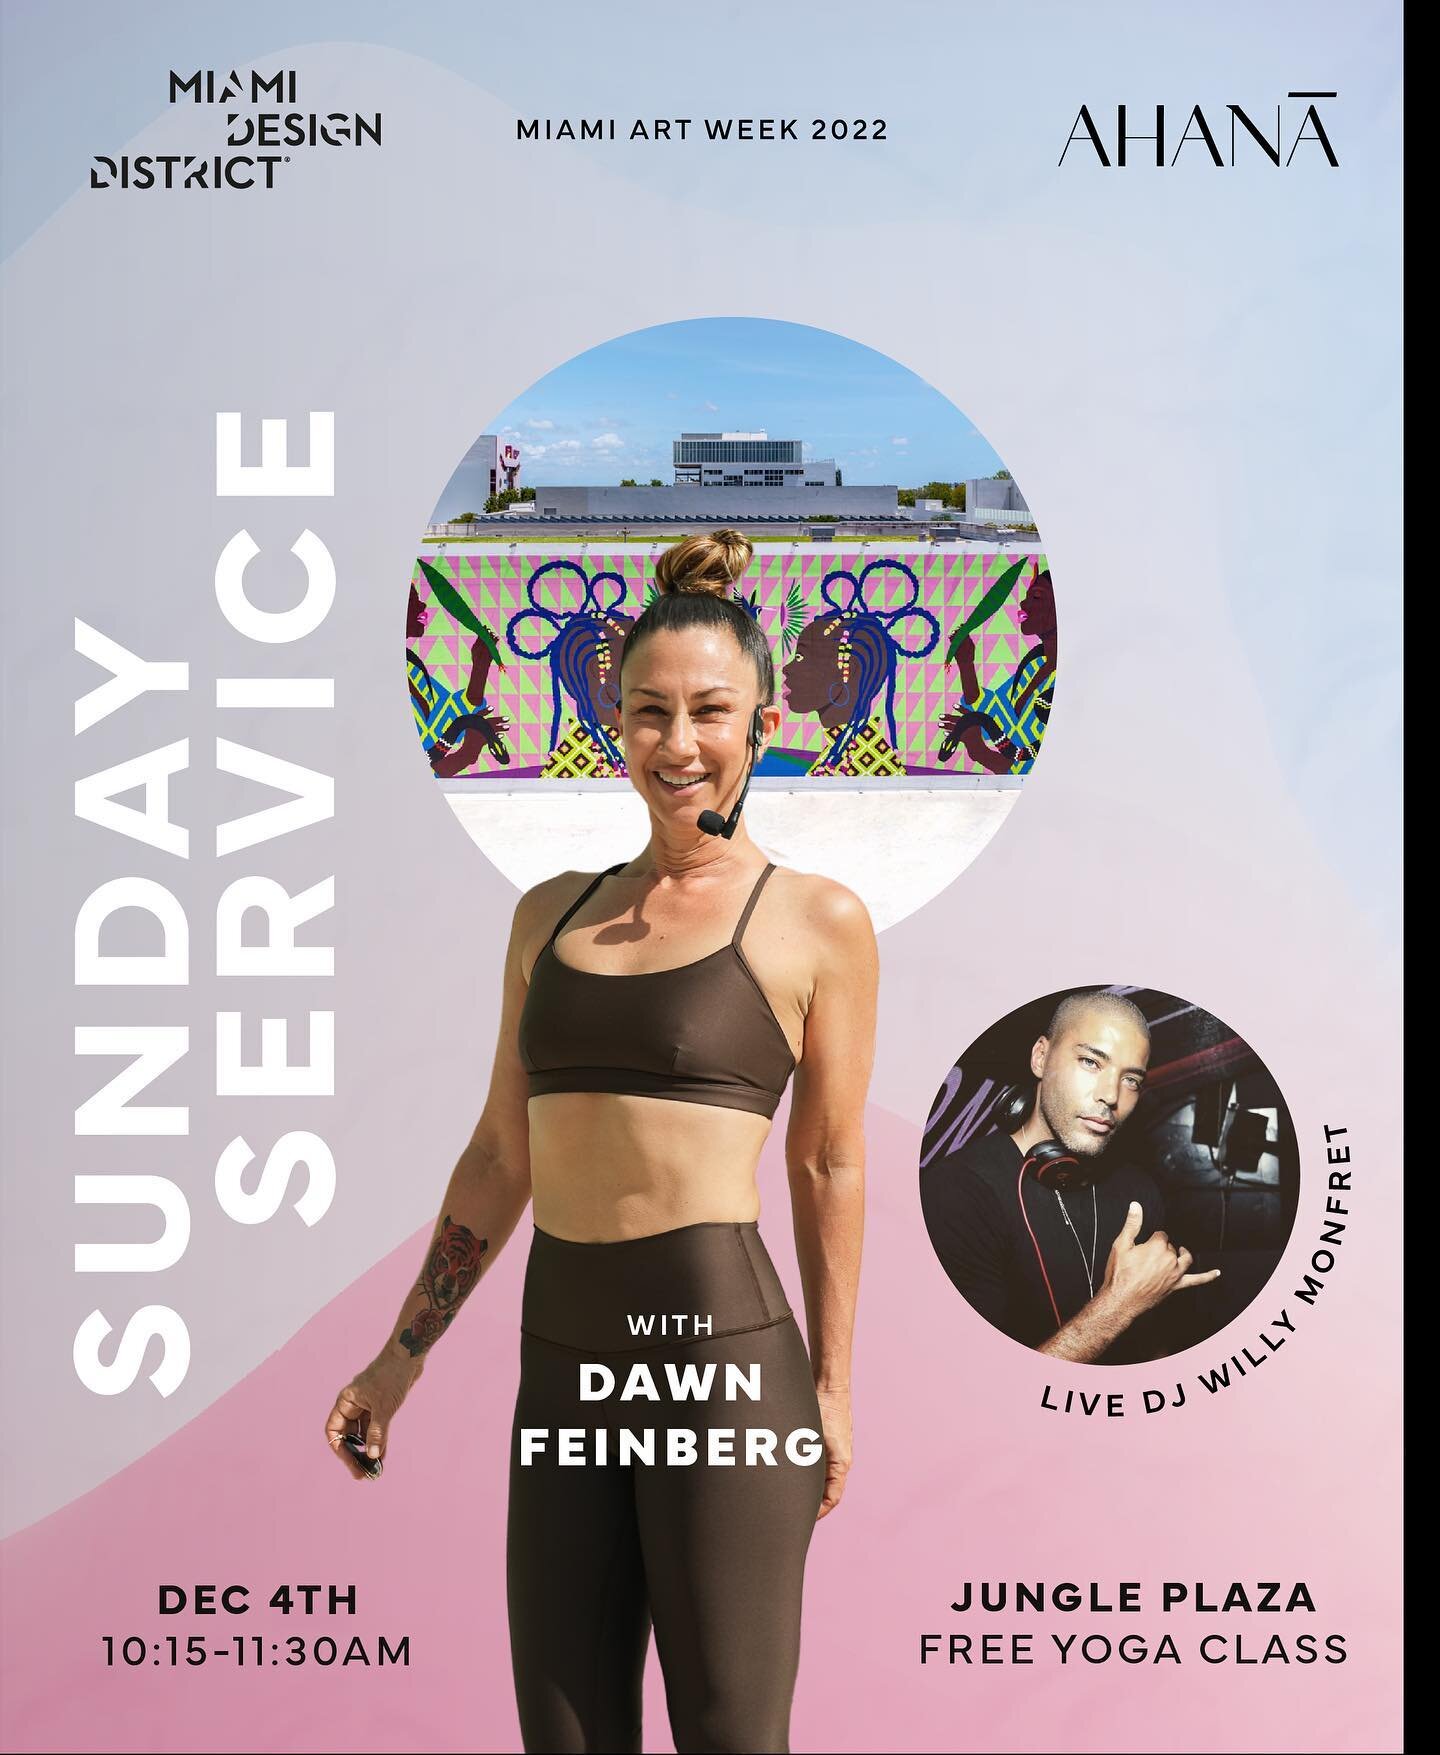 YO! FREE Sunday Service Basel with @dawnbyoga and live DJ @monfretwilly ❤️&zwj;🔥

When: THIS SUNDAY December 4th 10:15a
Where: Jungle Plaza 📍

It&rsquo;s free. Come. Show up and show out. Can&rsquo;t wait to see you all there. Link in bio to save y